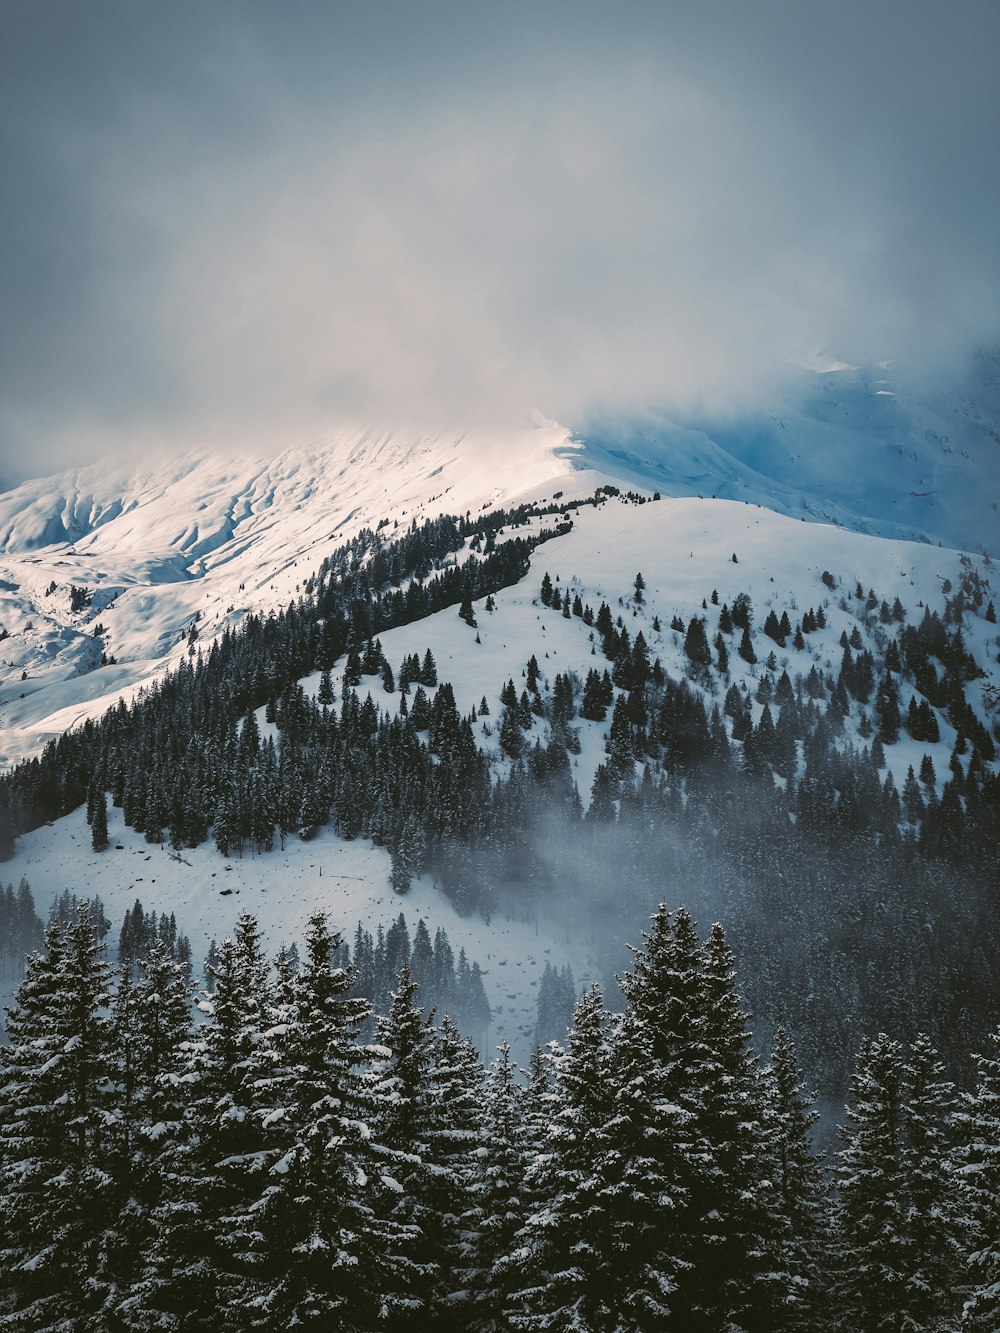 a mountain covered in snow and surrounded by pine trees